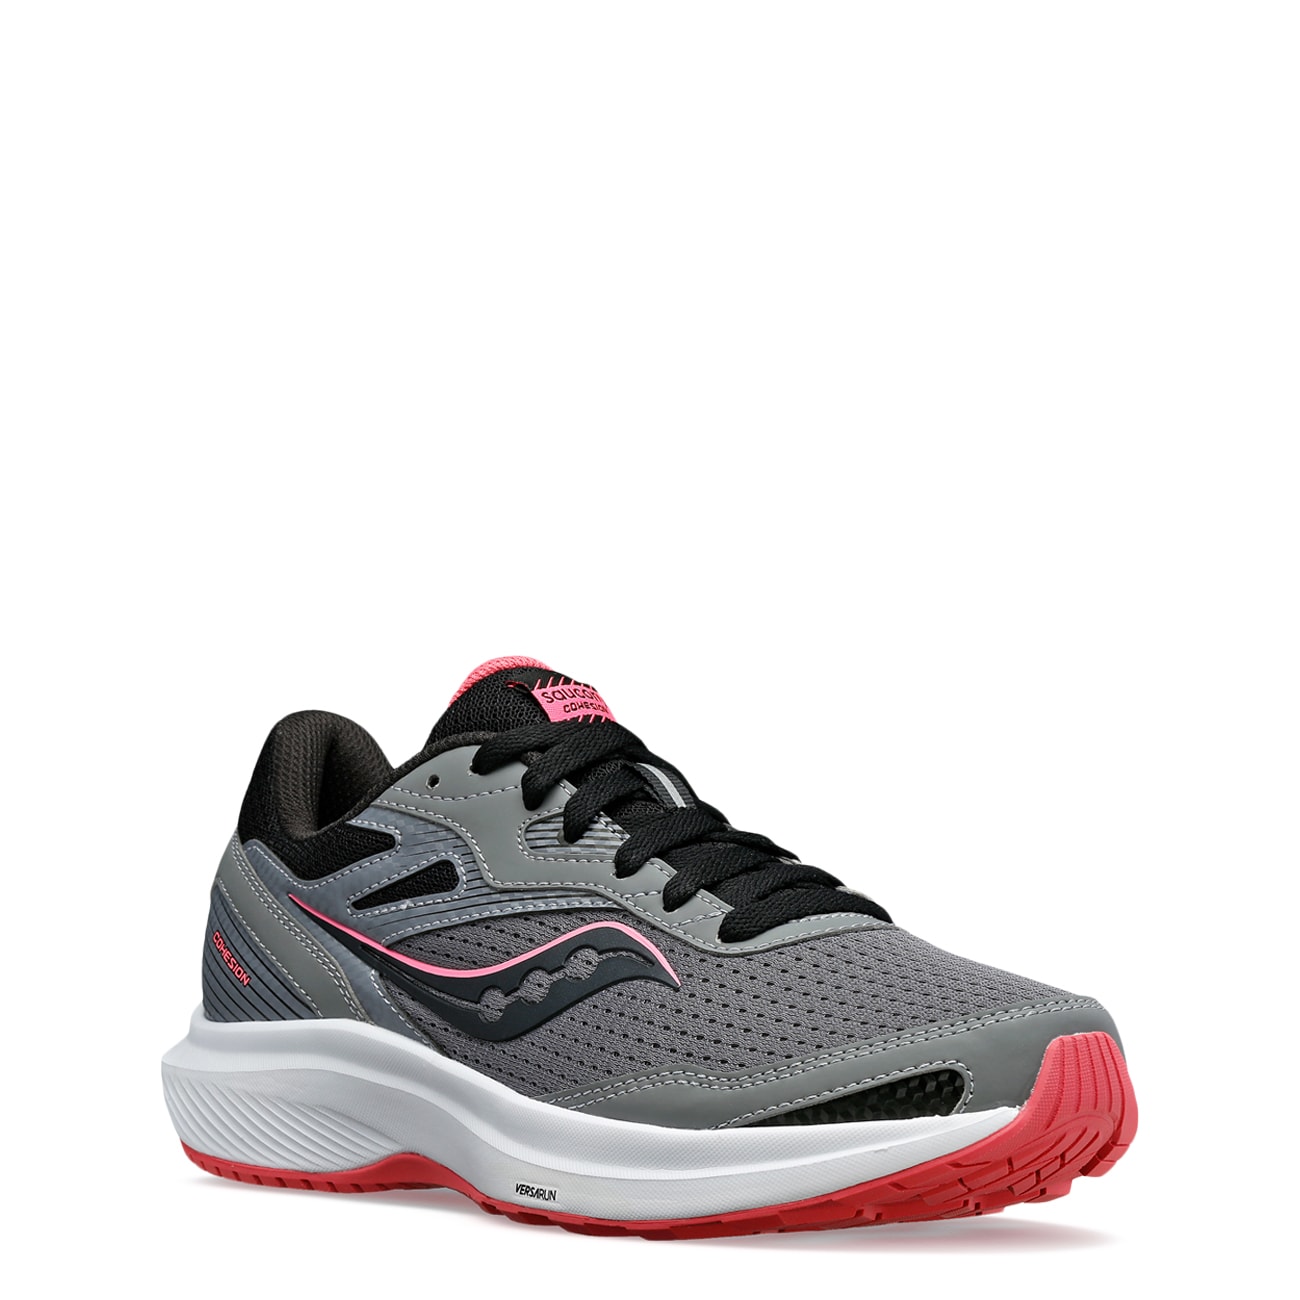 Women's Cohesion 16 Wide Running Shoe